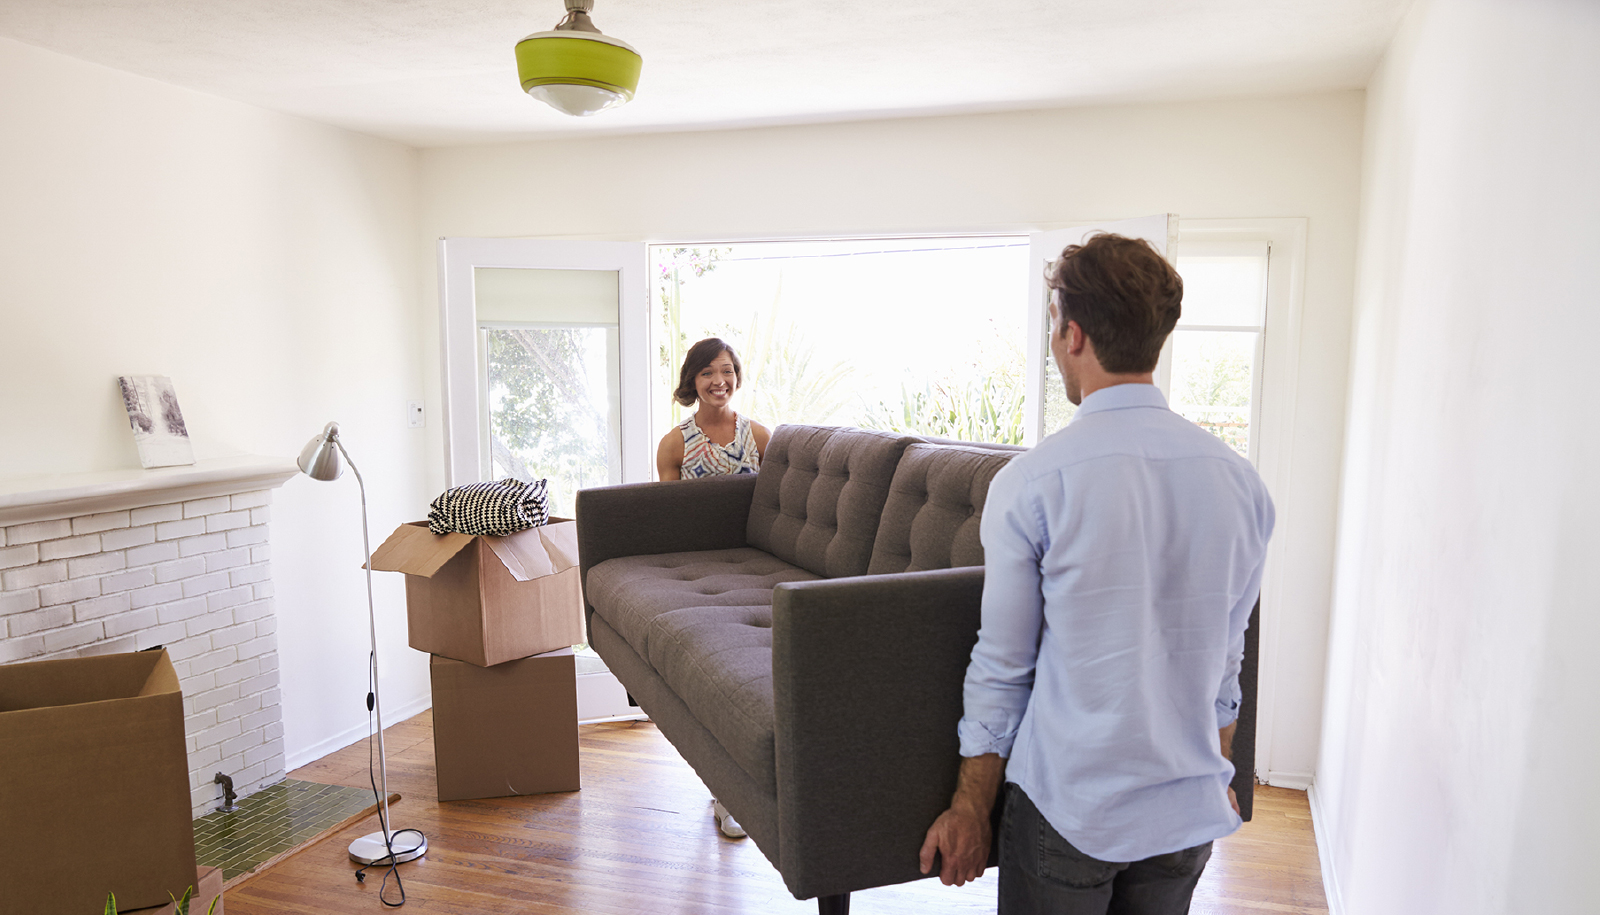 Two people carrying a brown sofa across the living room.